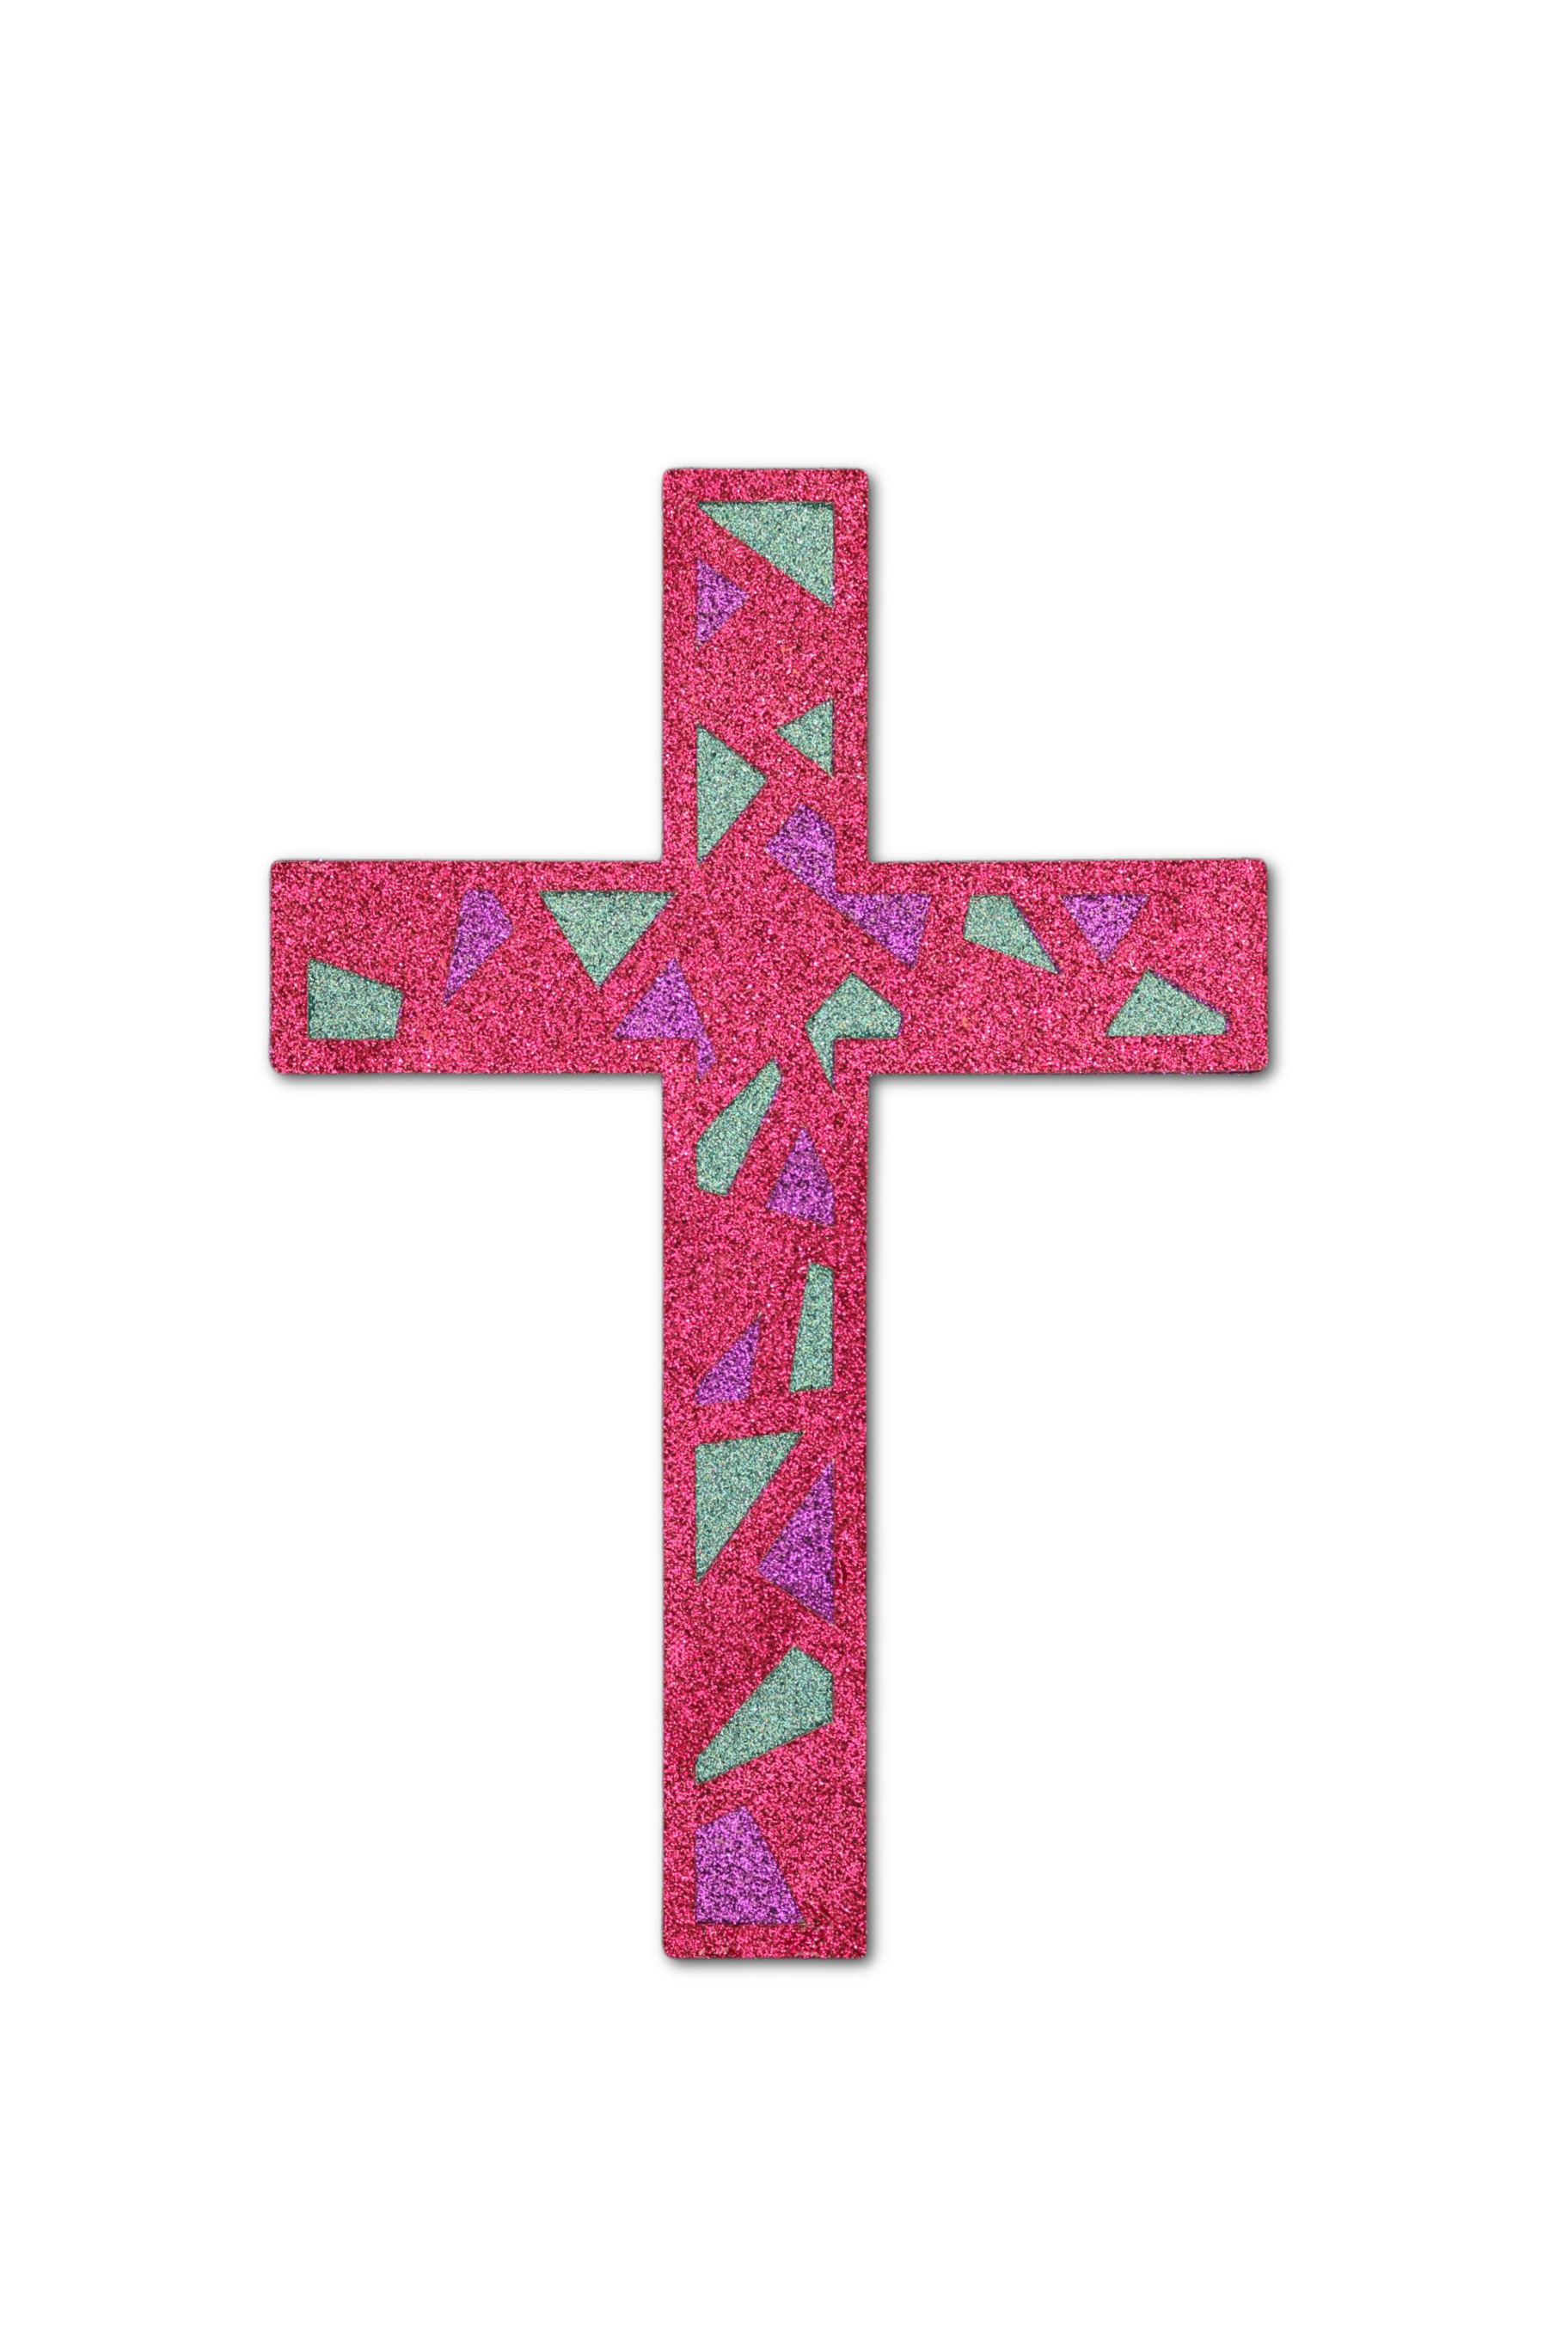 the first three layers of a paper cross